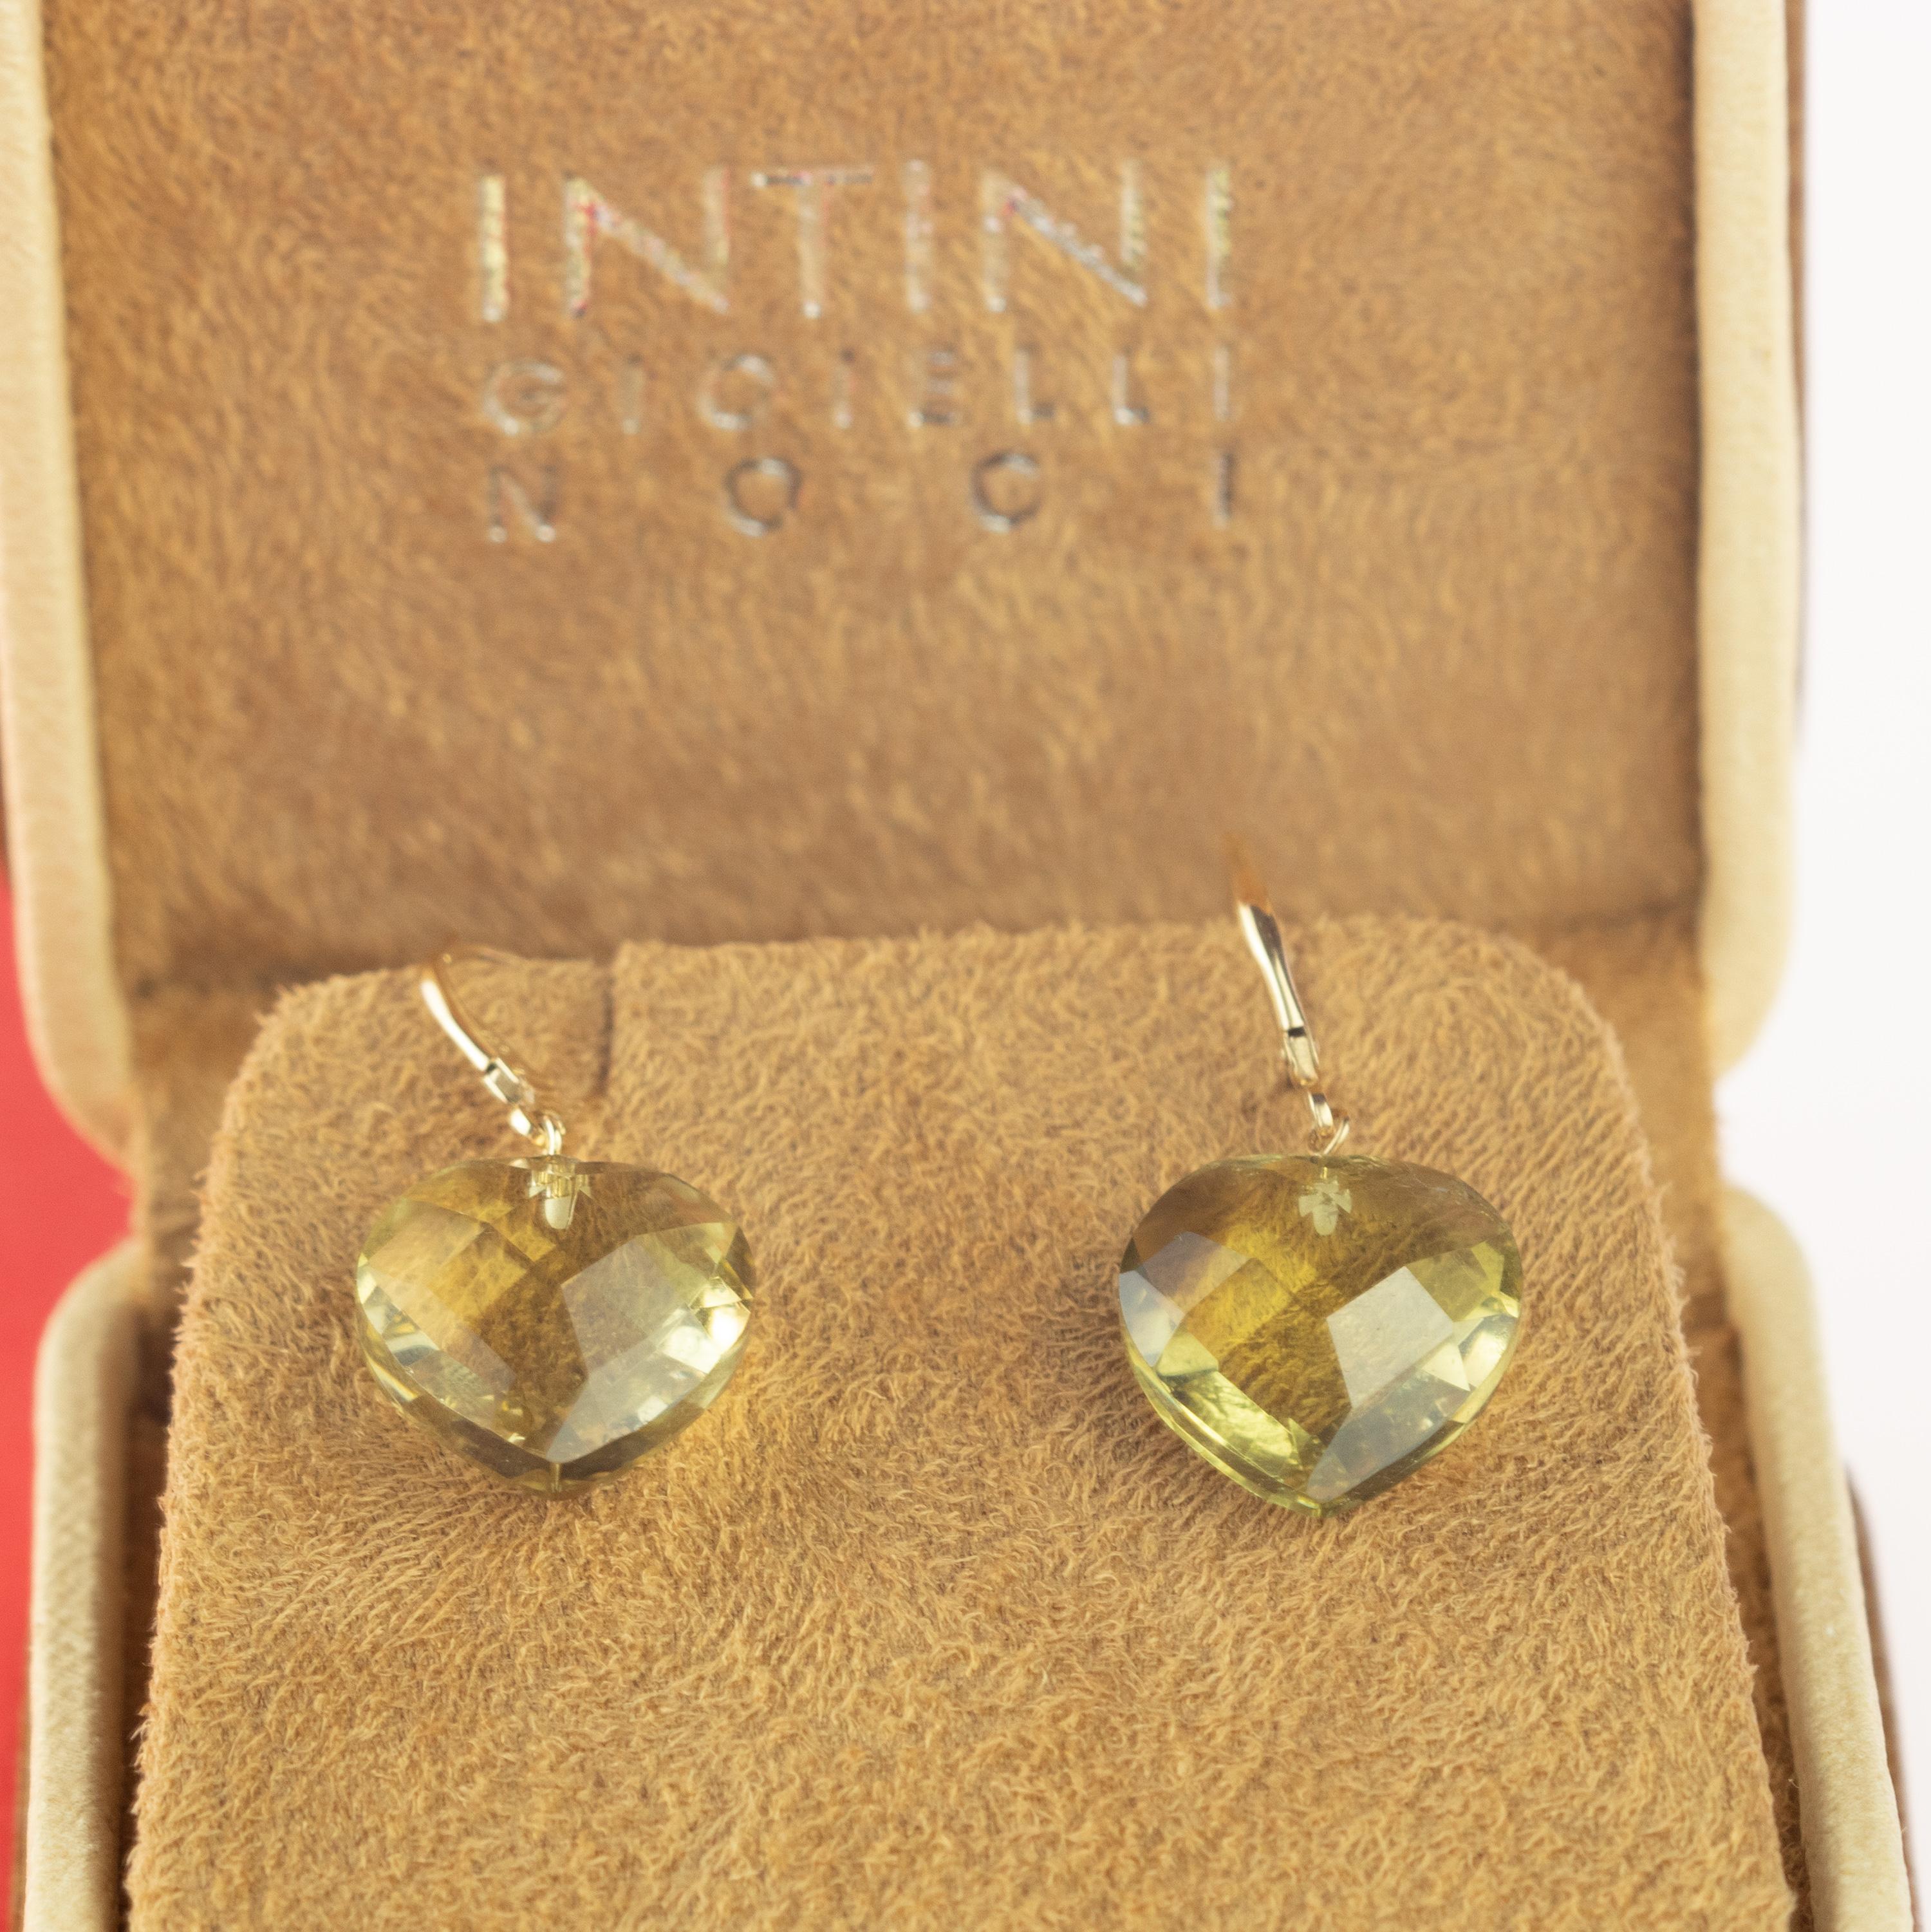 Take love with you everywhere! These breathtaking Citrine Lemon Quartz earrings have modern Leverback clousure design and the most precious stones. These earrings are the perfect glamorous jewelry for a daily occasion. 

Fall in love with Intini